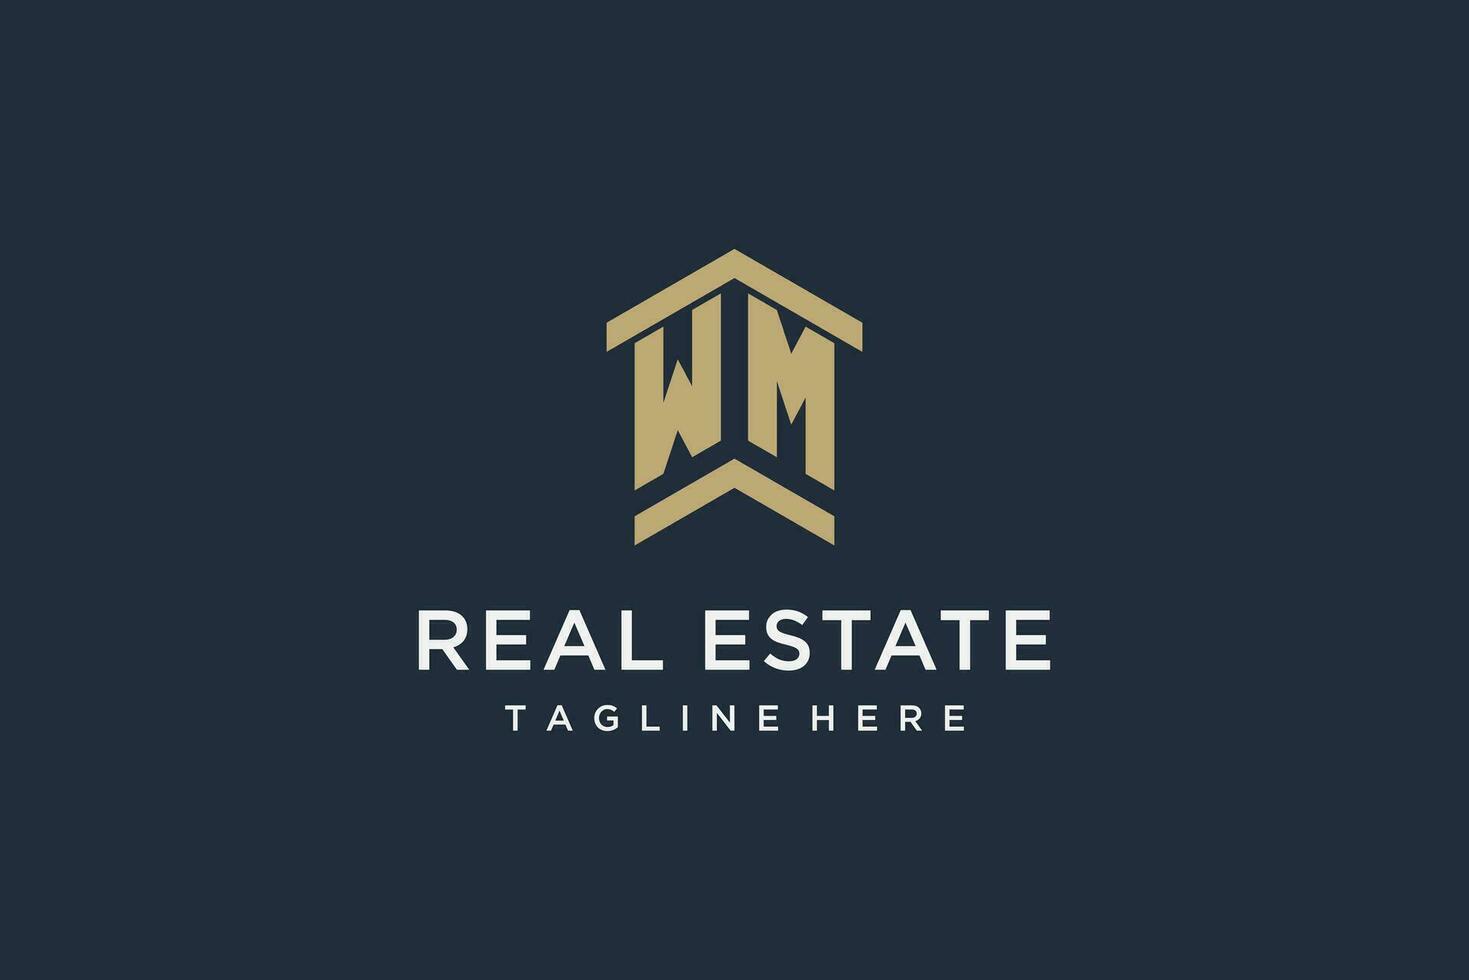 Initial WM logo for real estate with simple and creative house roof icon logo design ideas vector